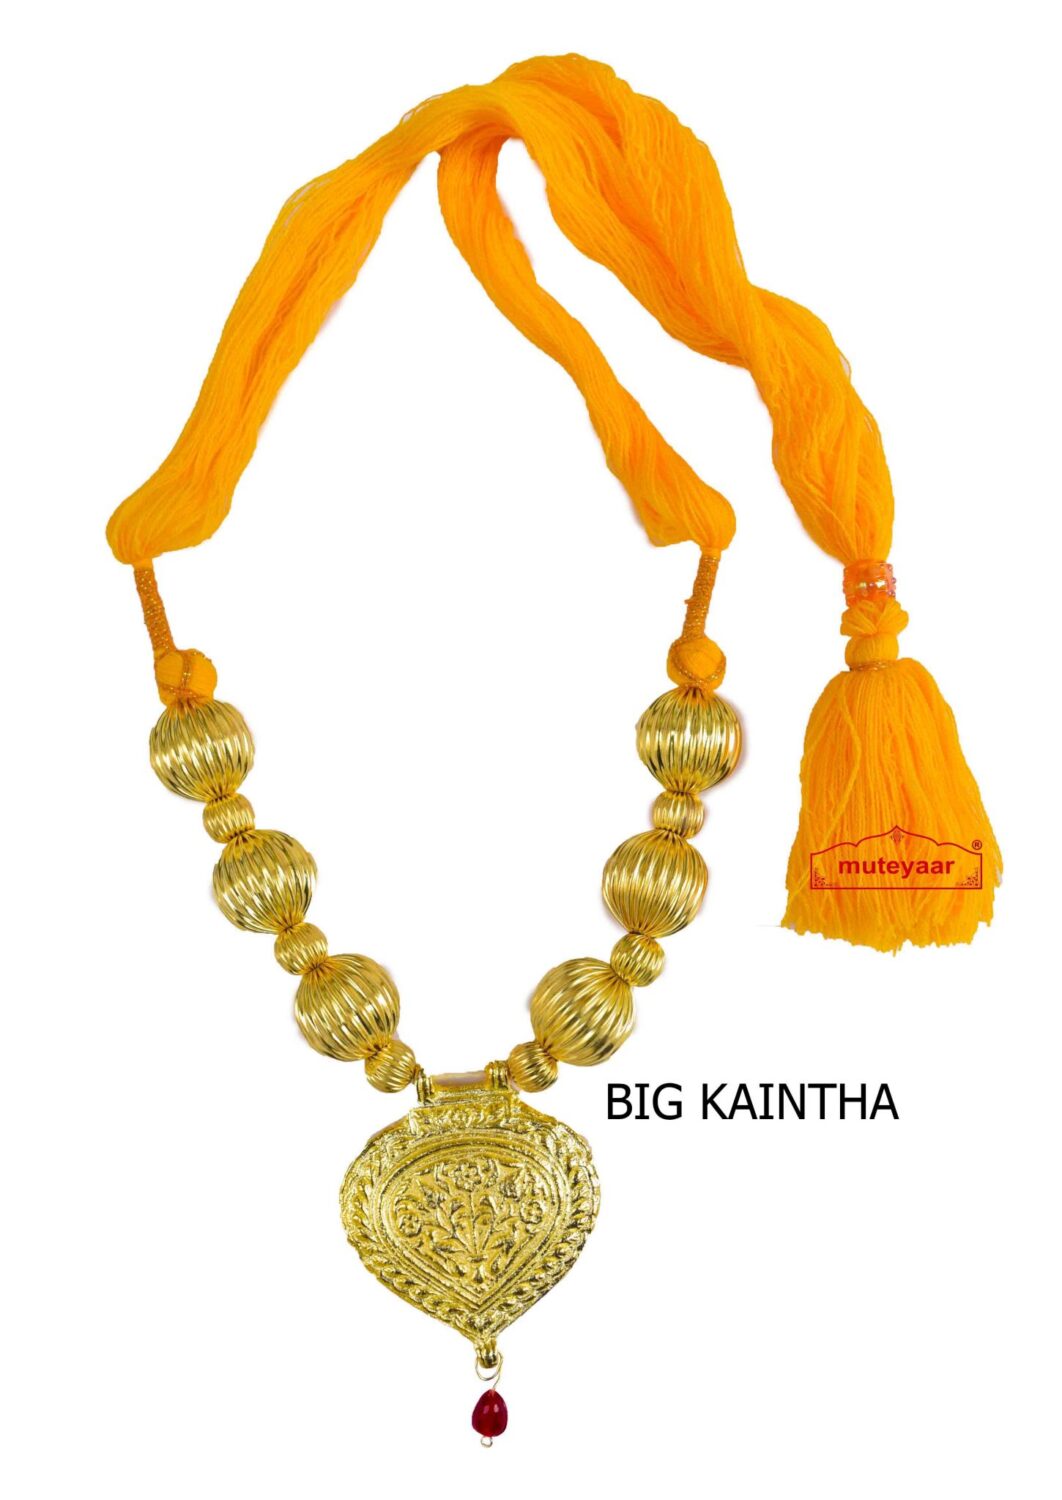 Golden Kaintha Necklace for Bhangra Giddha | Costume Jewelry